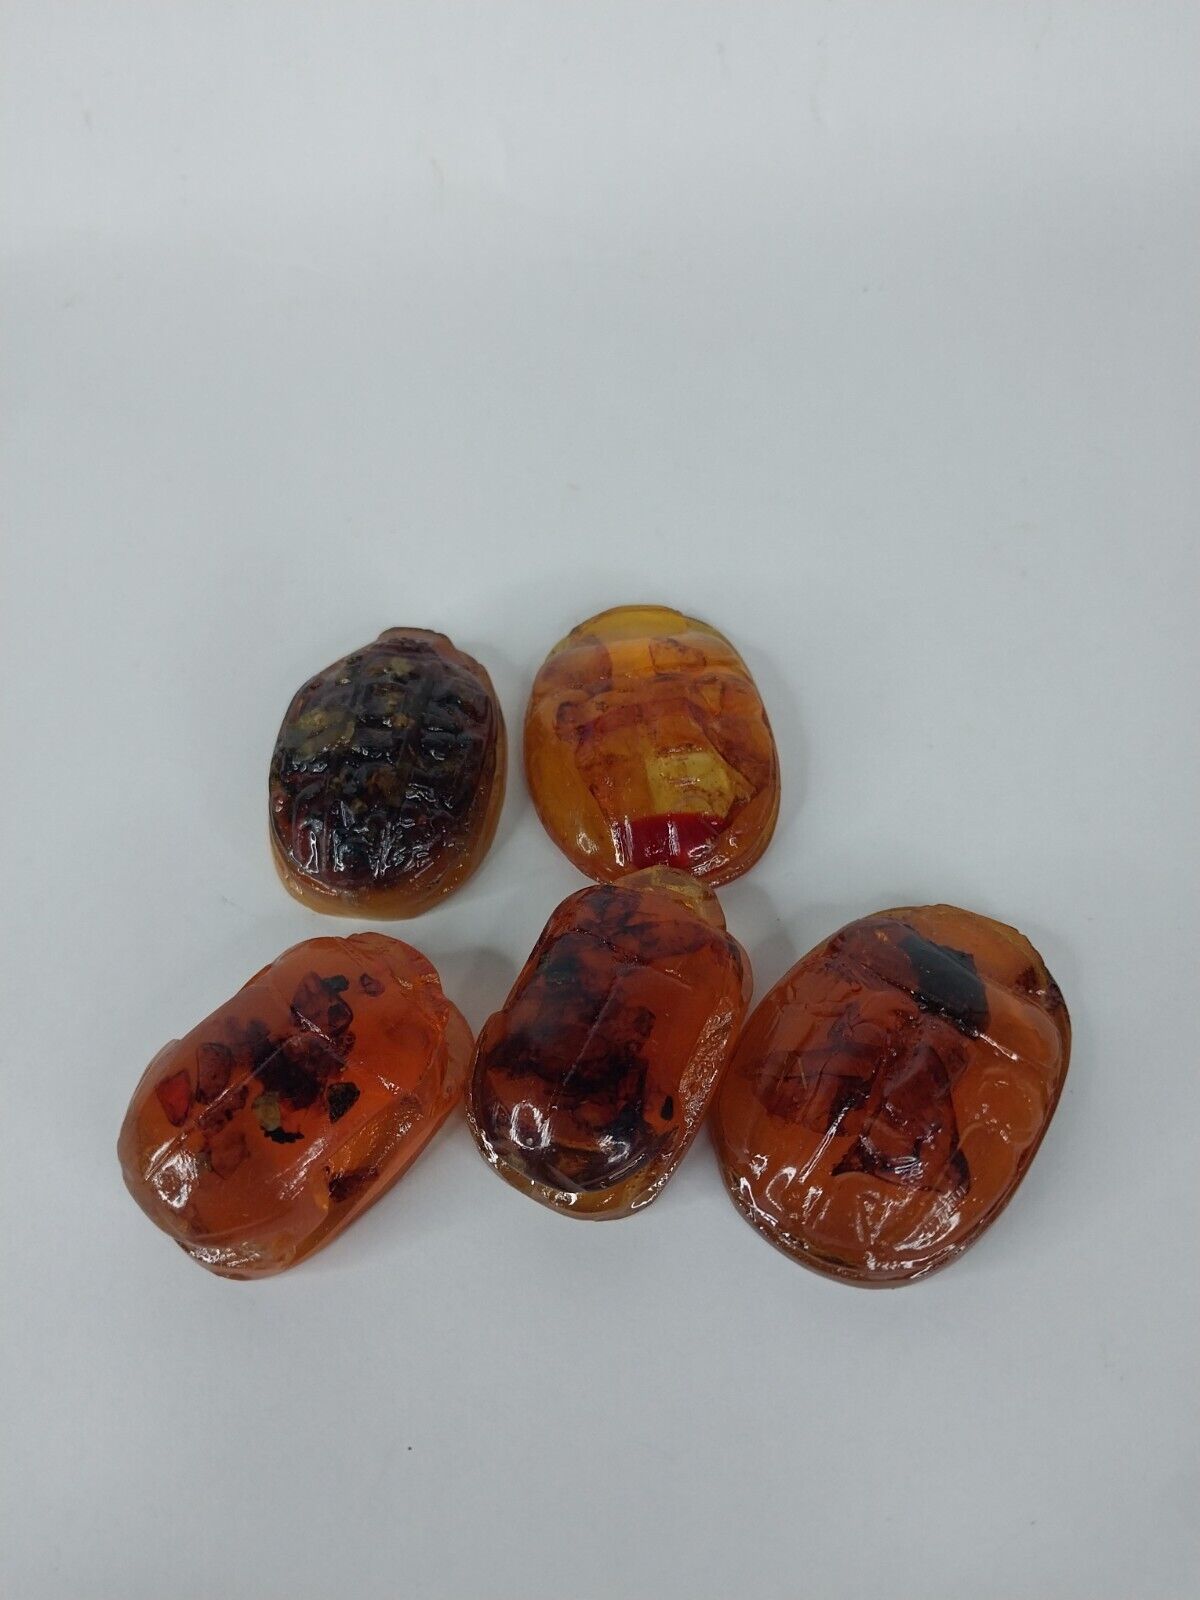 UNIQUE 5 ANCIENT EGYPTIAN Antique Scarab Amber Luck Hieroglyphic Protection